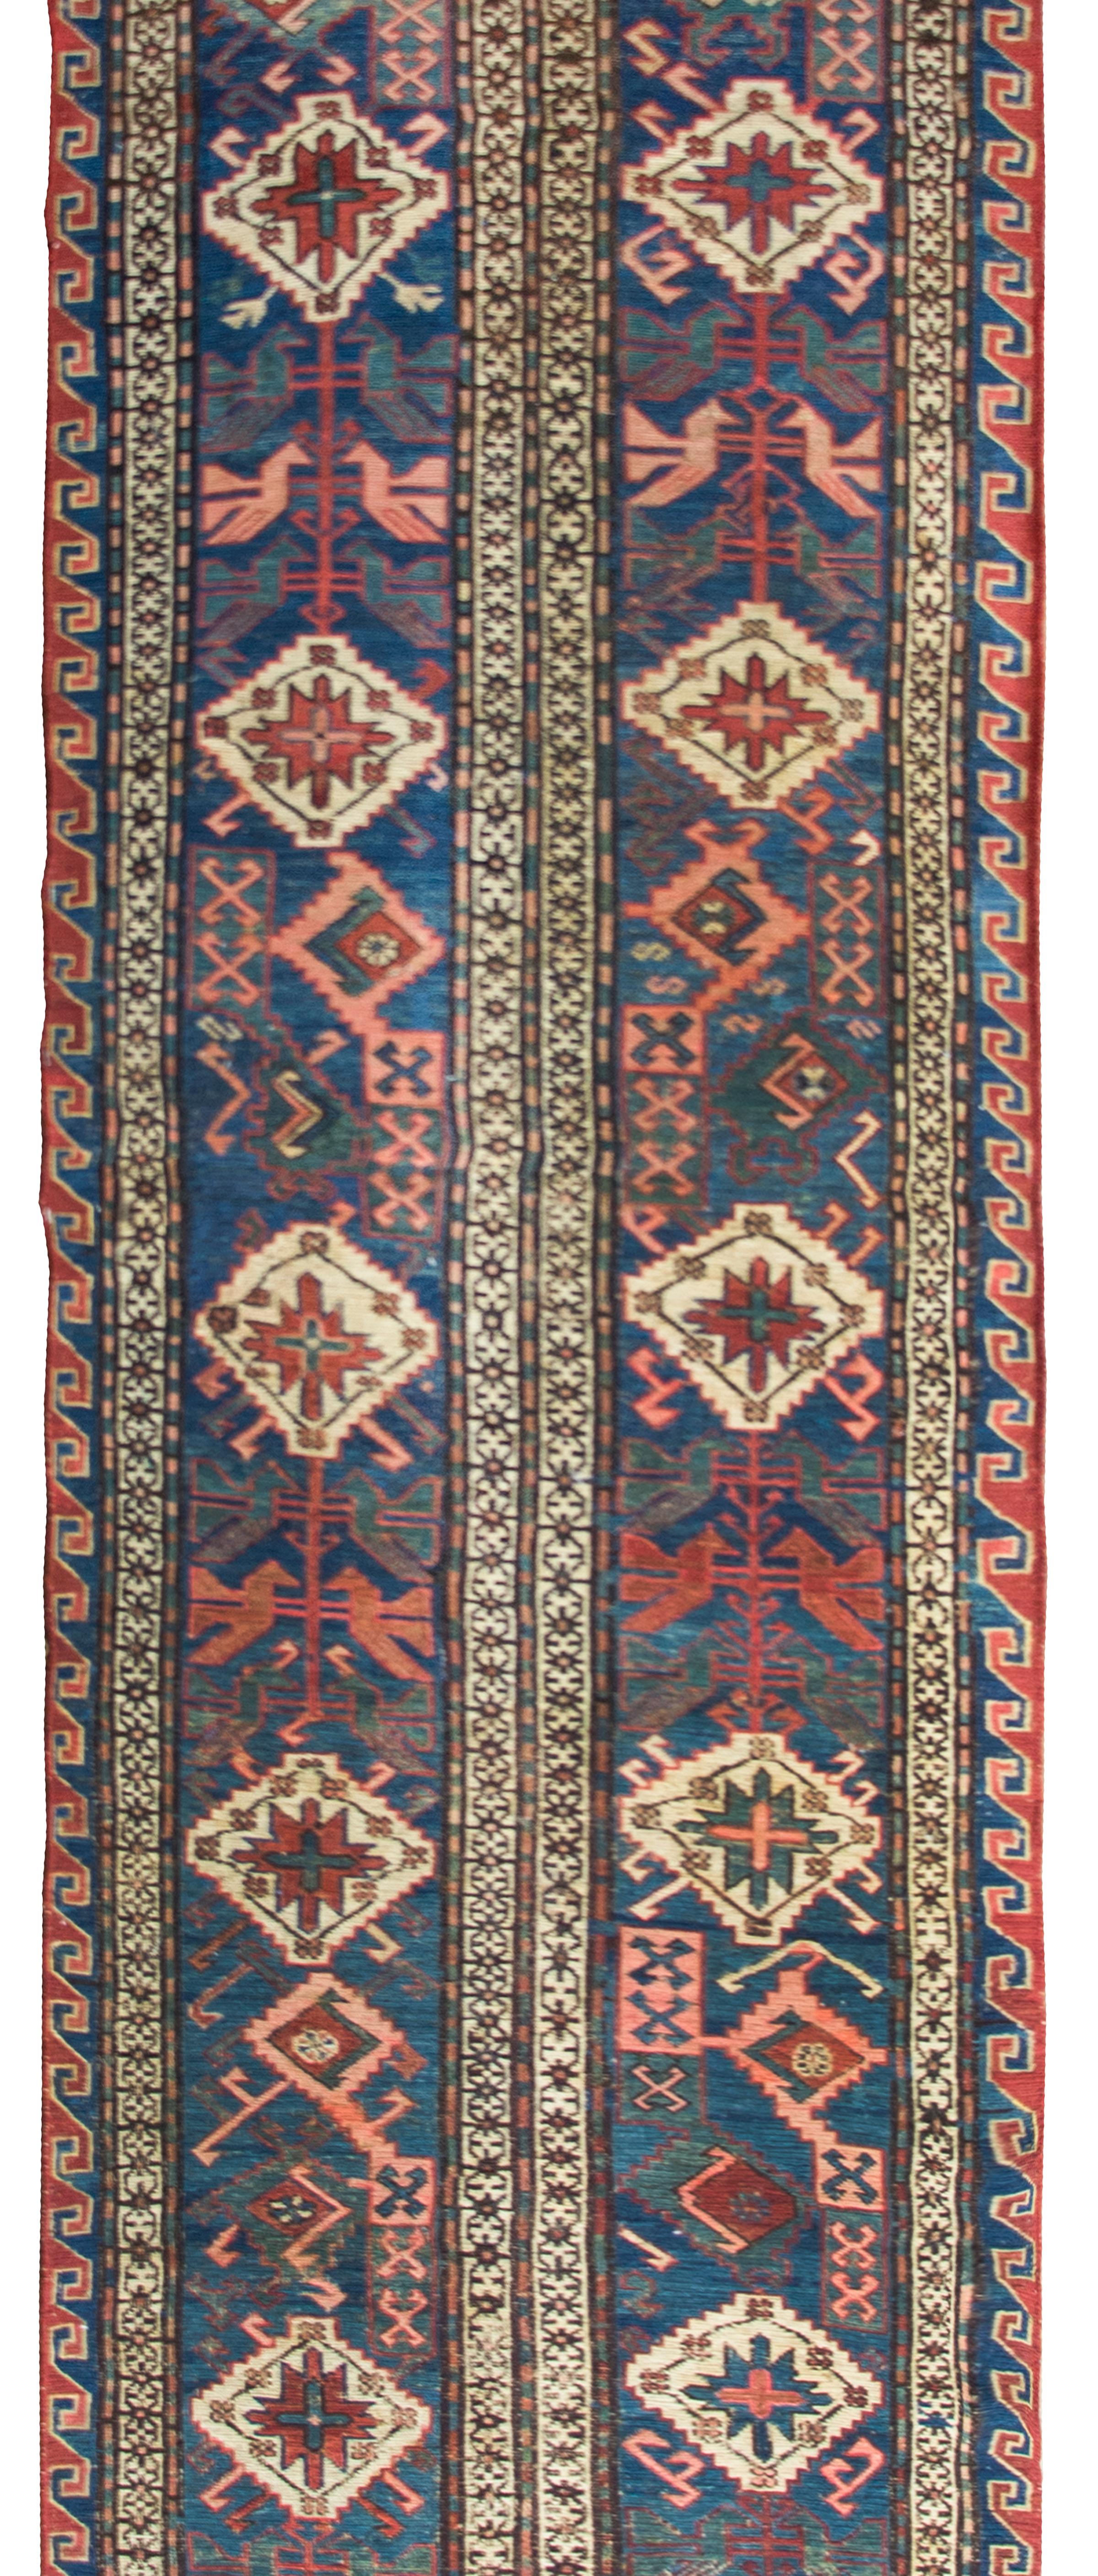 A stunning early 20th century Persian Soumak runner with the most wonderful tribal pattern with several white diamond medallions amidst a field of stylized flowers and birds, woven in pink and green, outlined in crimson stripes, and set against an